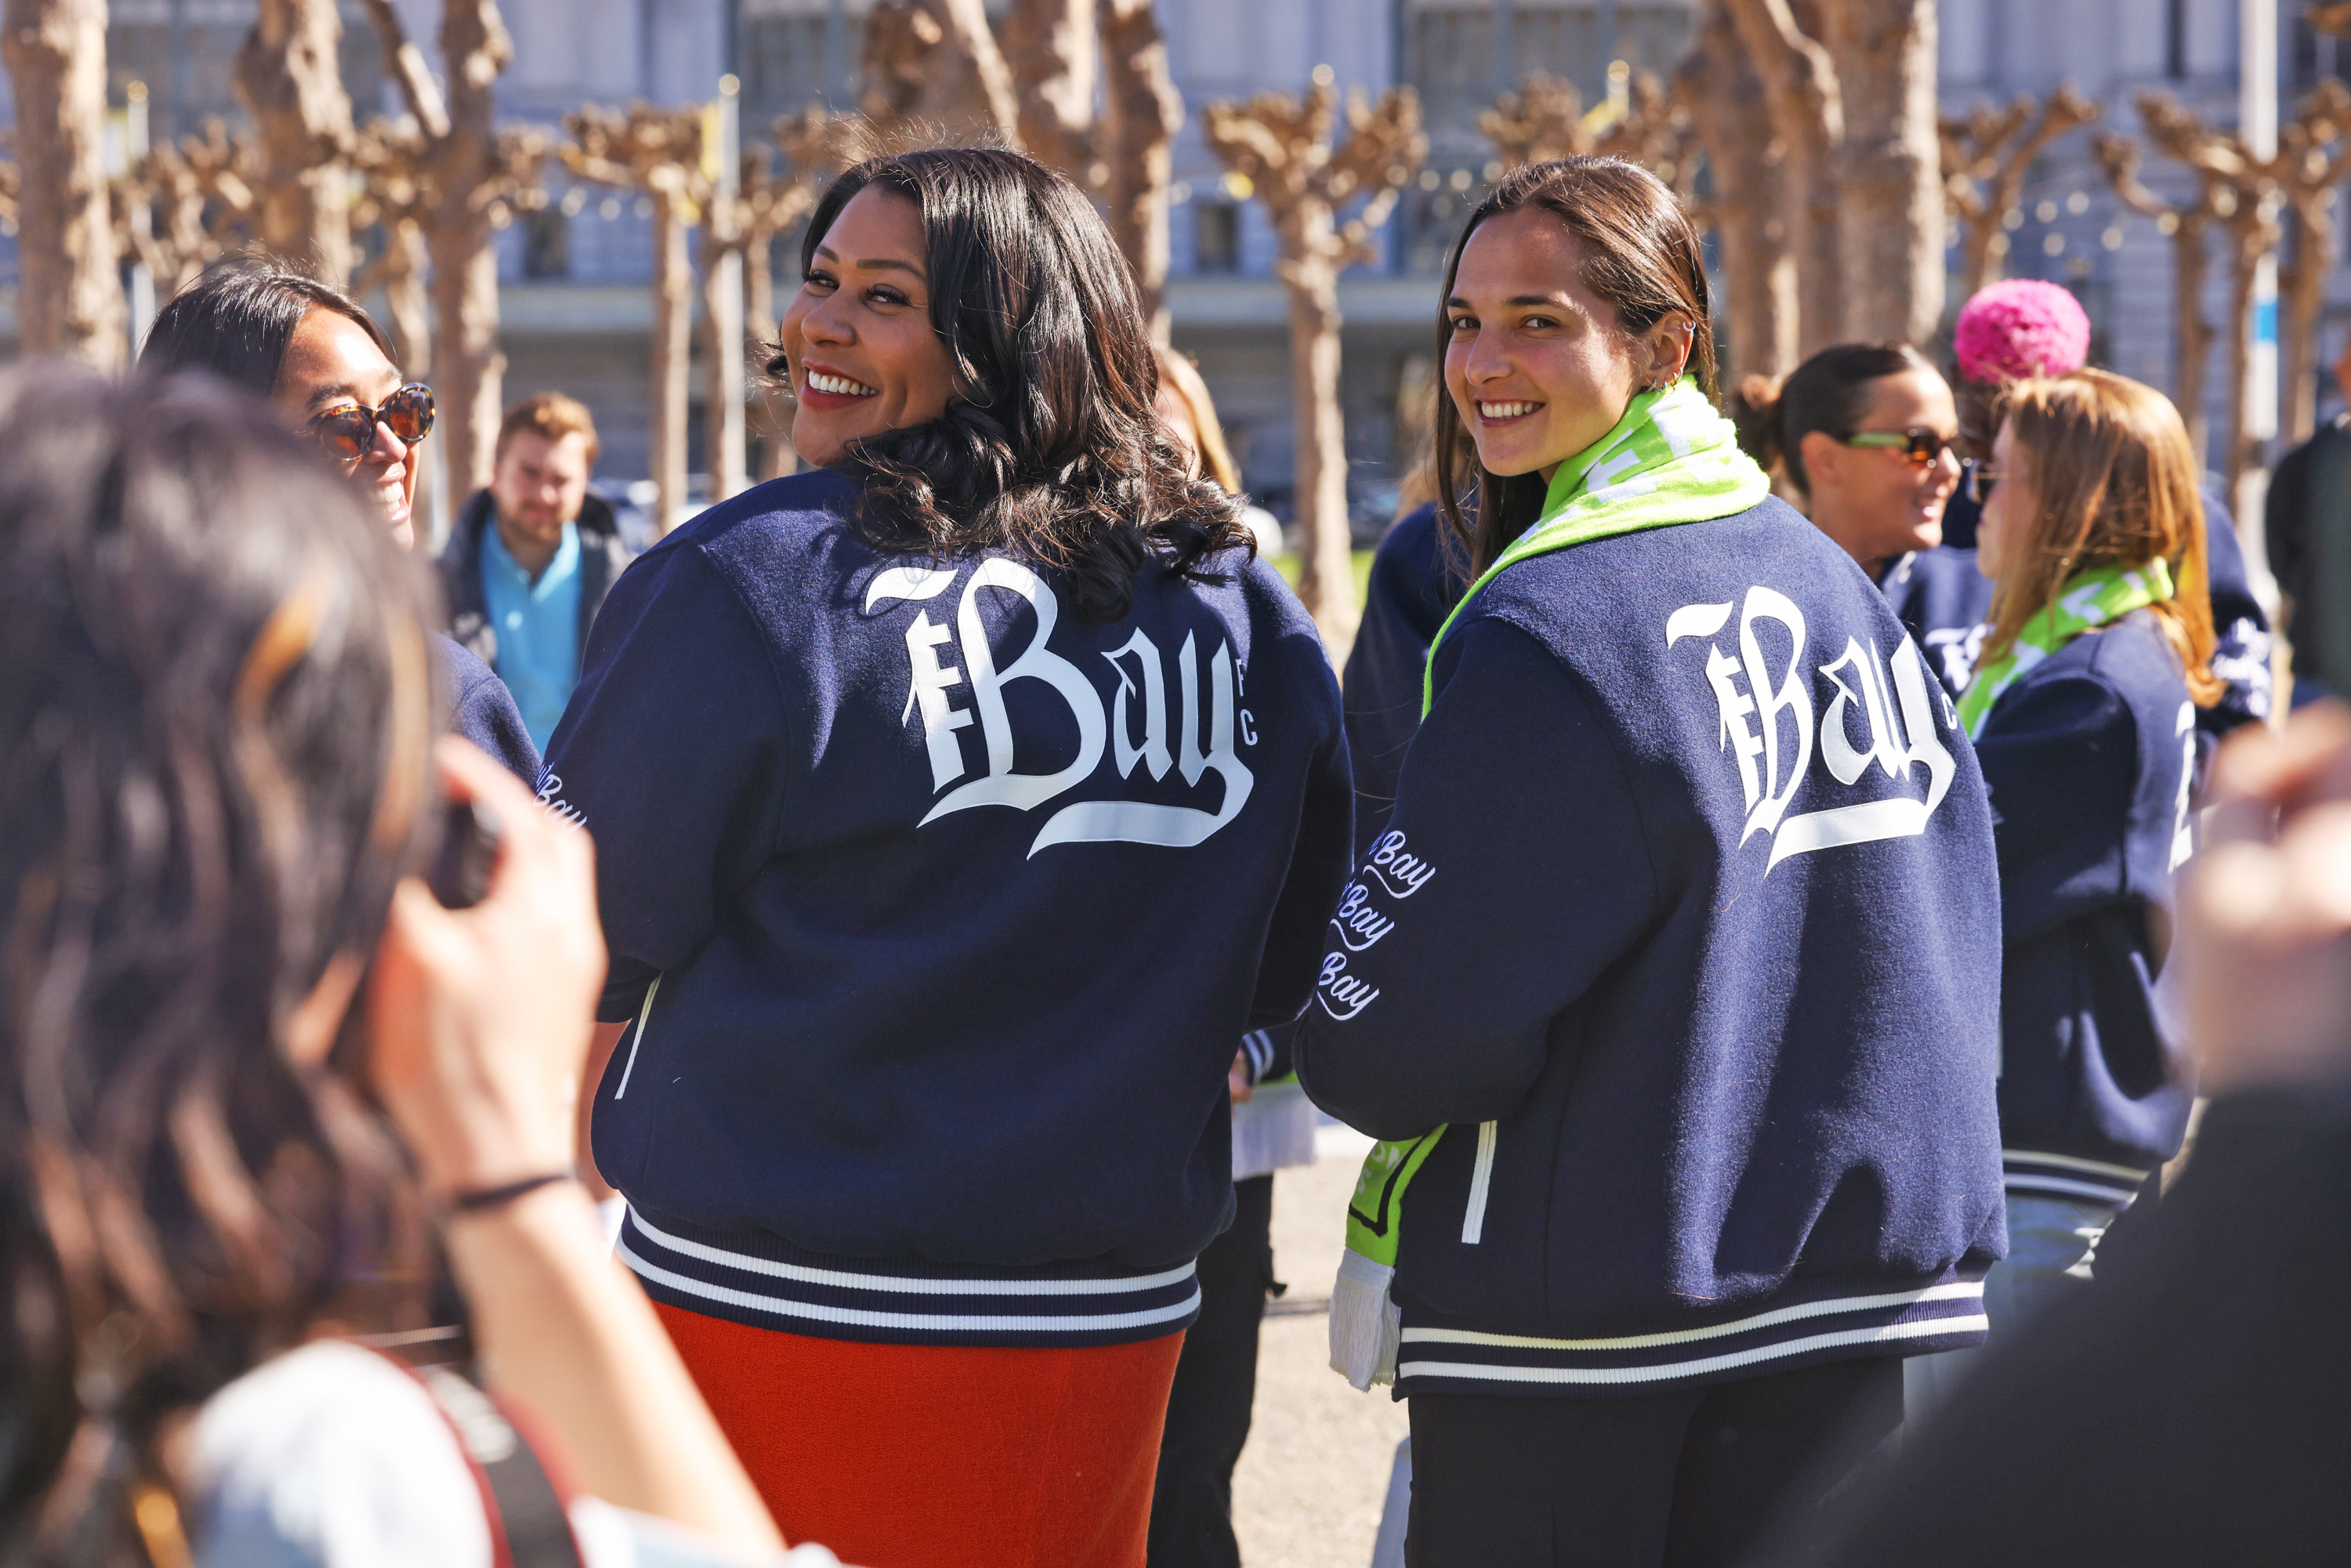 Two smiling women in &quot;#Bay&quot; jackets amidst a sunny outdoor gathering.